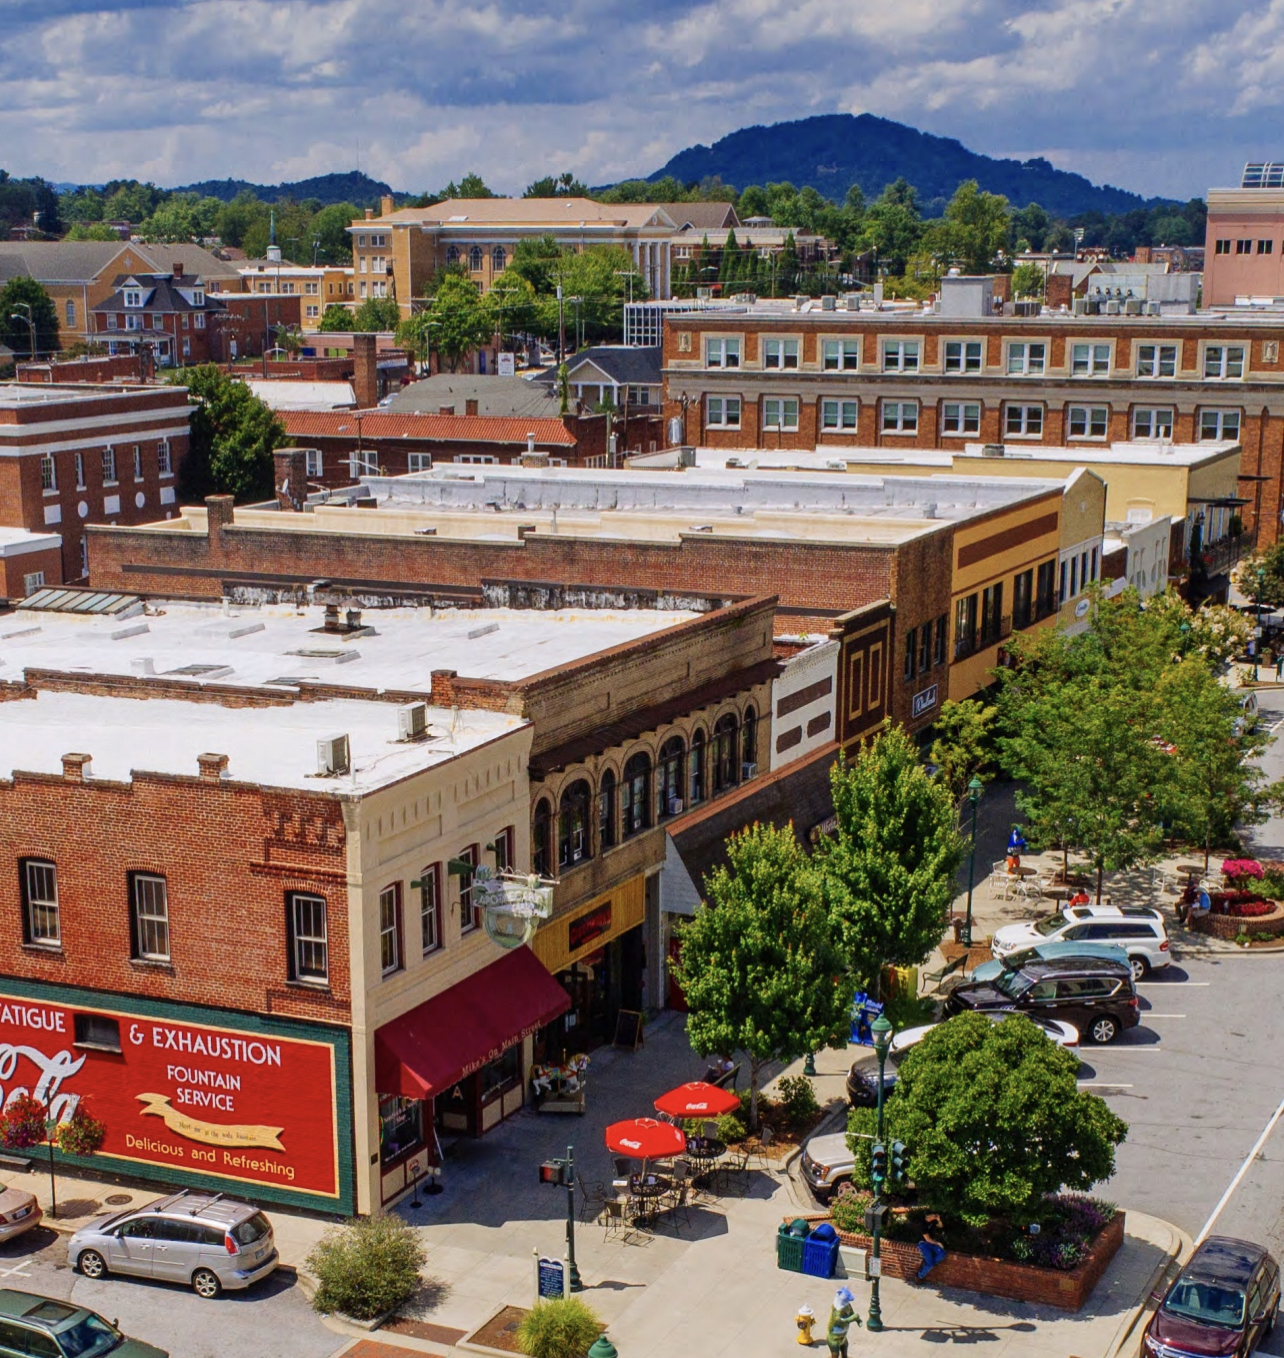 Hendersonville, NC: A Vibrant Mountain Town Offering Something For Everyone